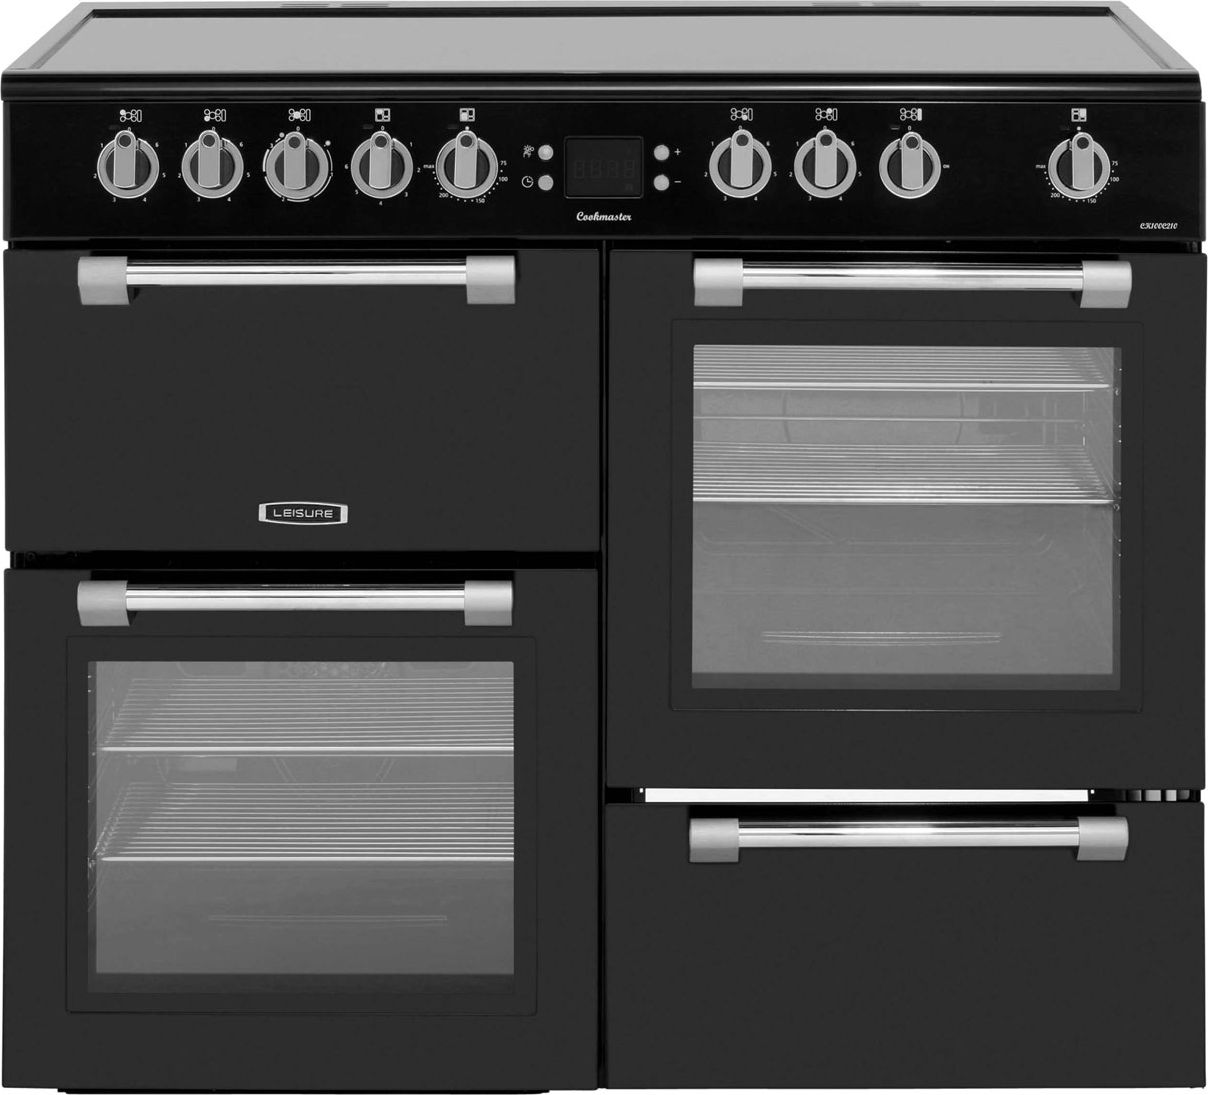 Leisure Cookmaster CK100C210K 100cm Electric Range Cooker with Ceramic Hob - Black - A/A Rated, Black